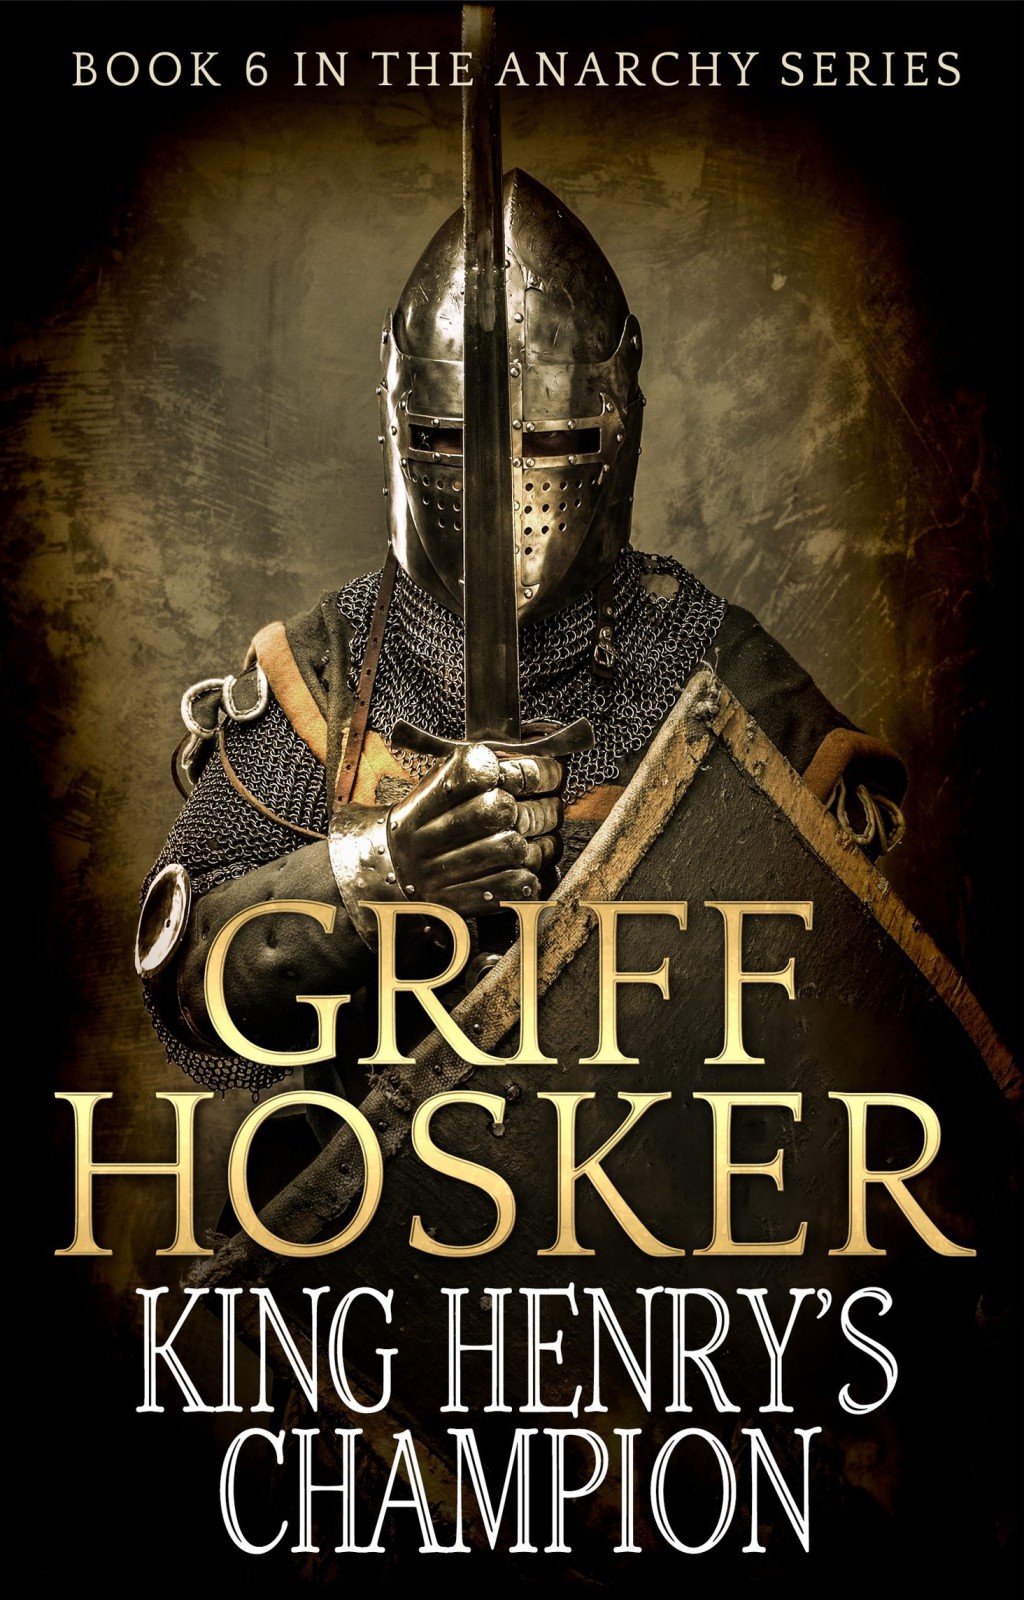 King Henry's Champion by Griff Hosker